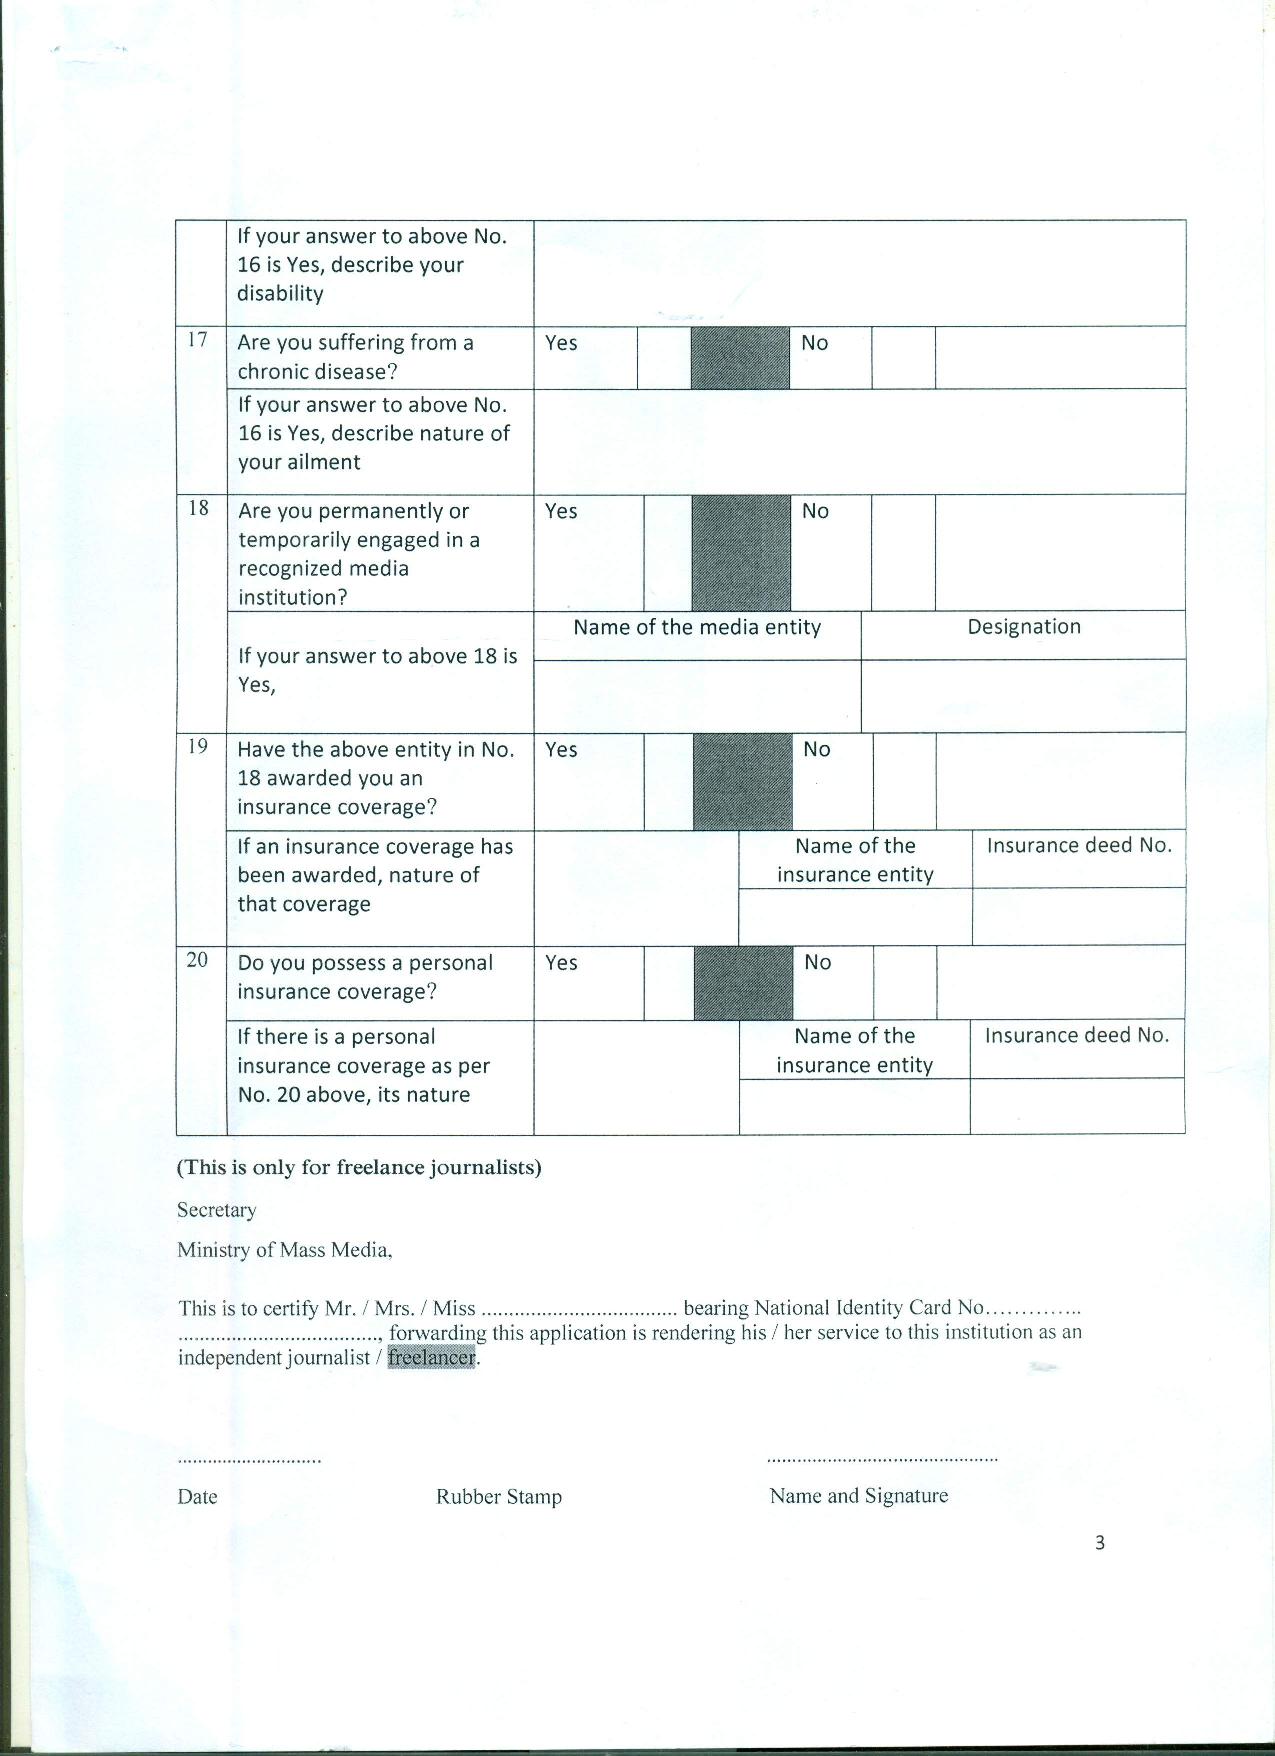 full application english page 003